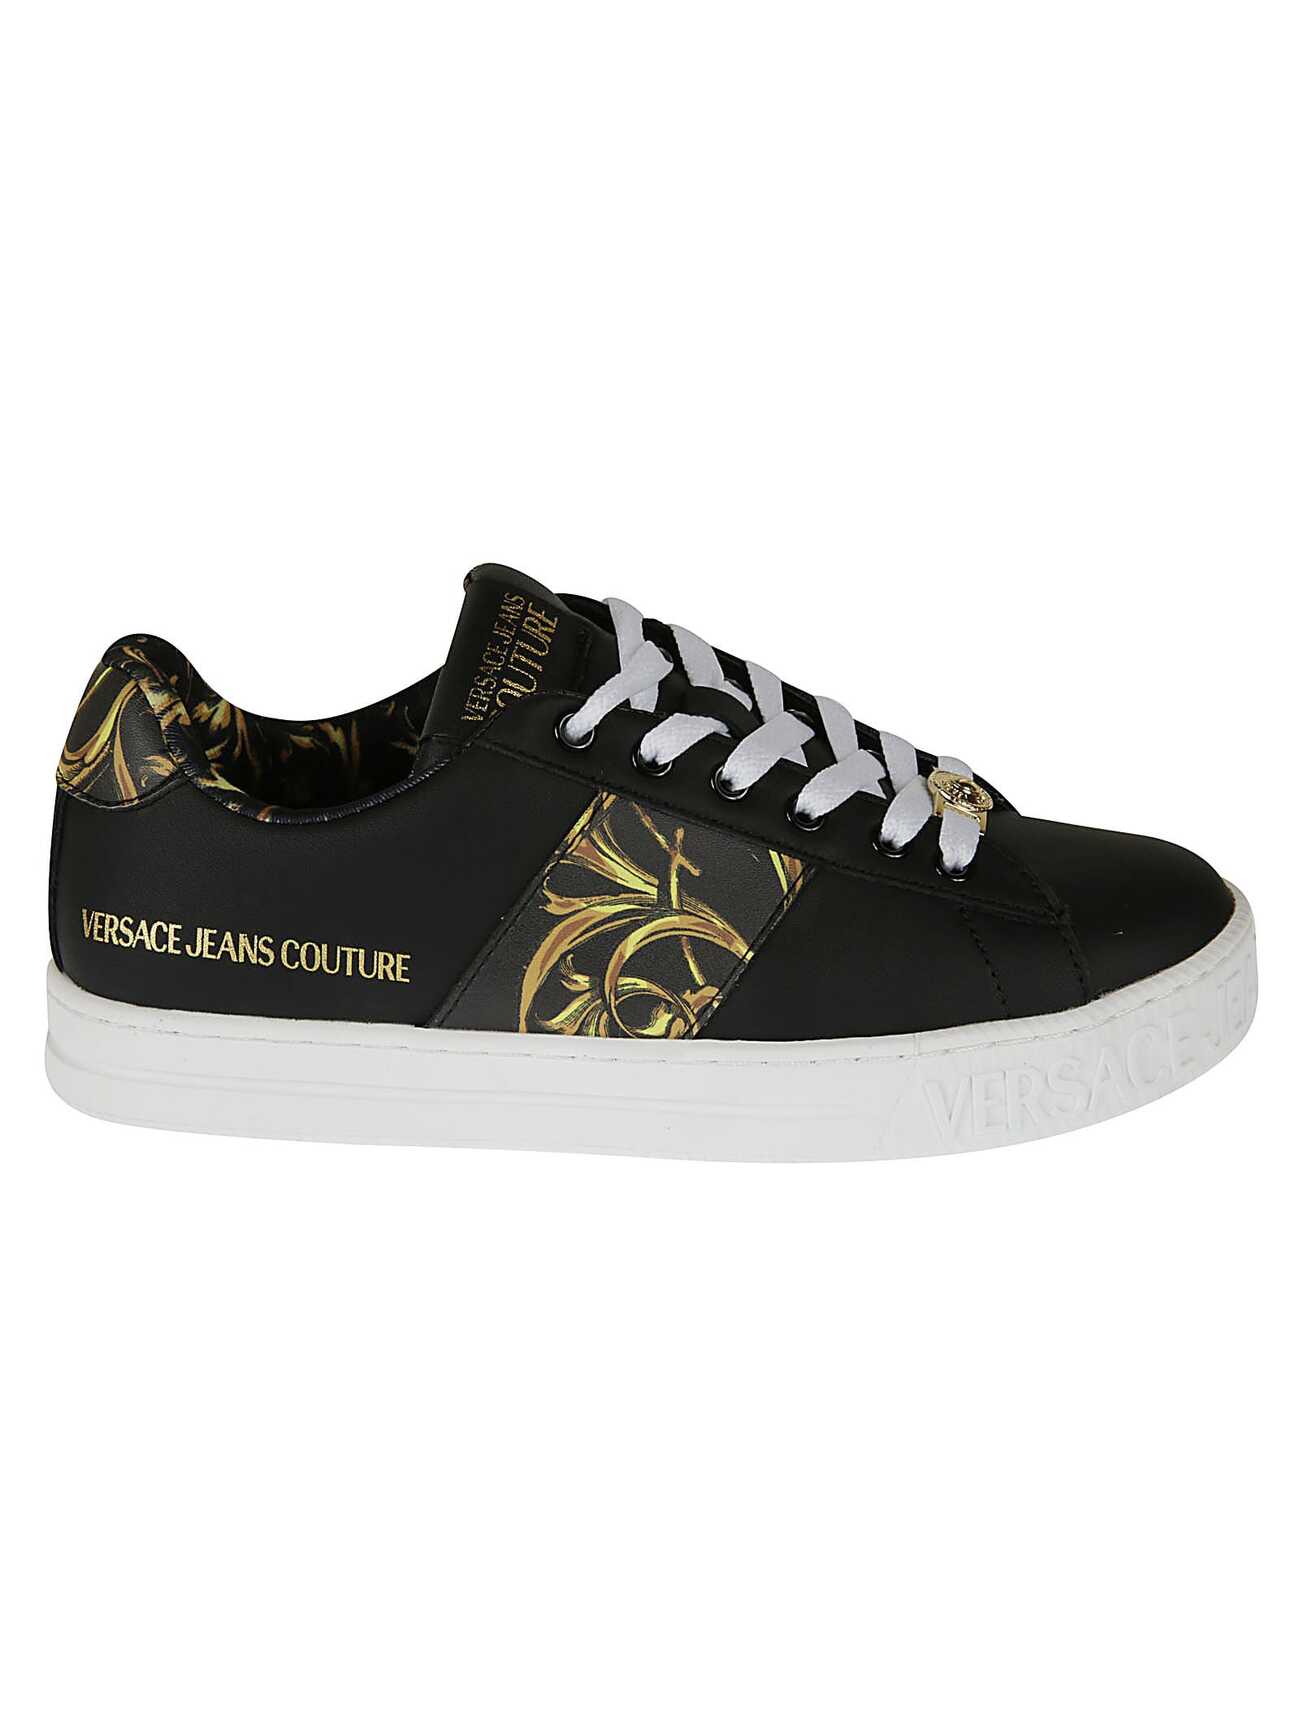 Versace Jeans Couture Fondo Court Sneakers in black